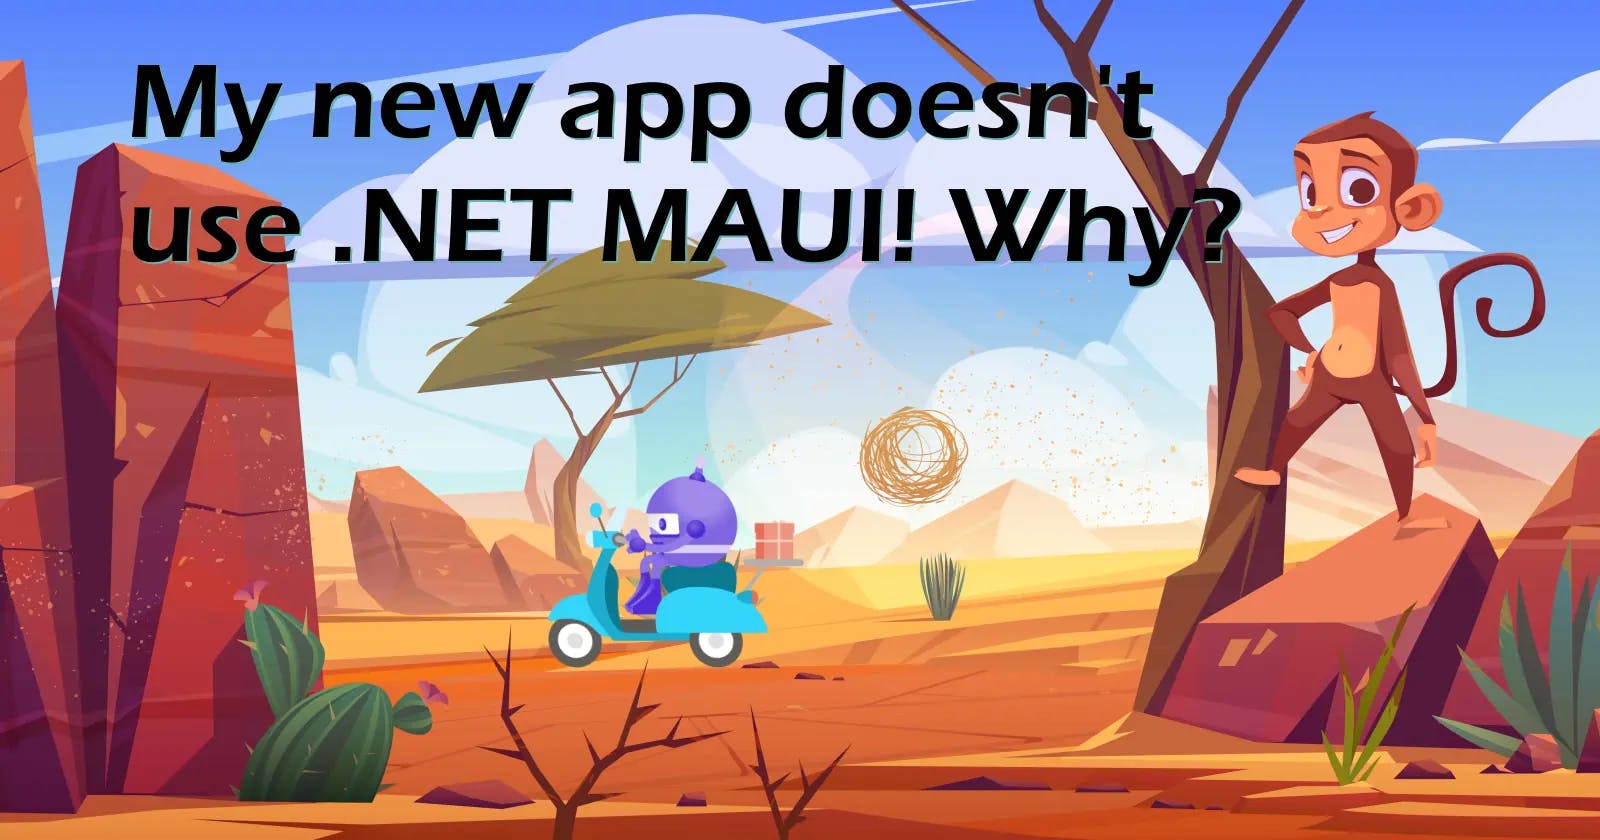 My new app doesn't use .NET MAUI! Why?